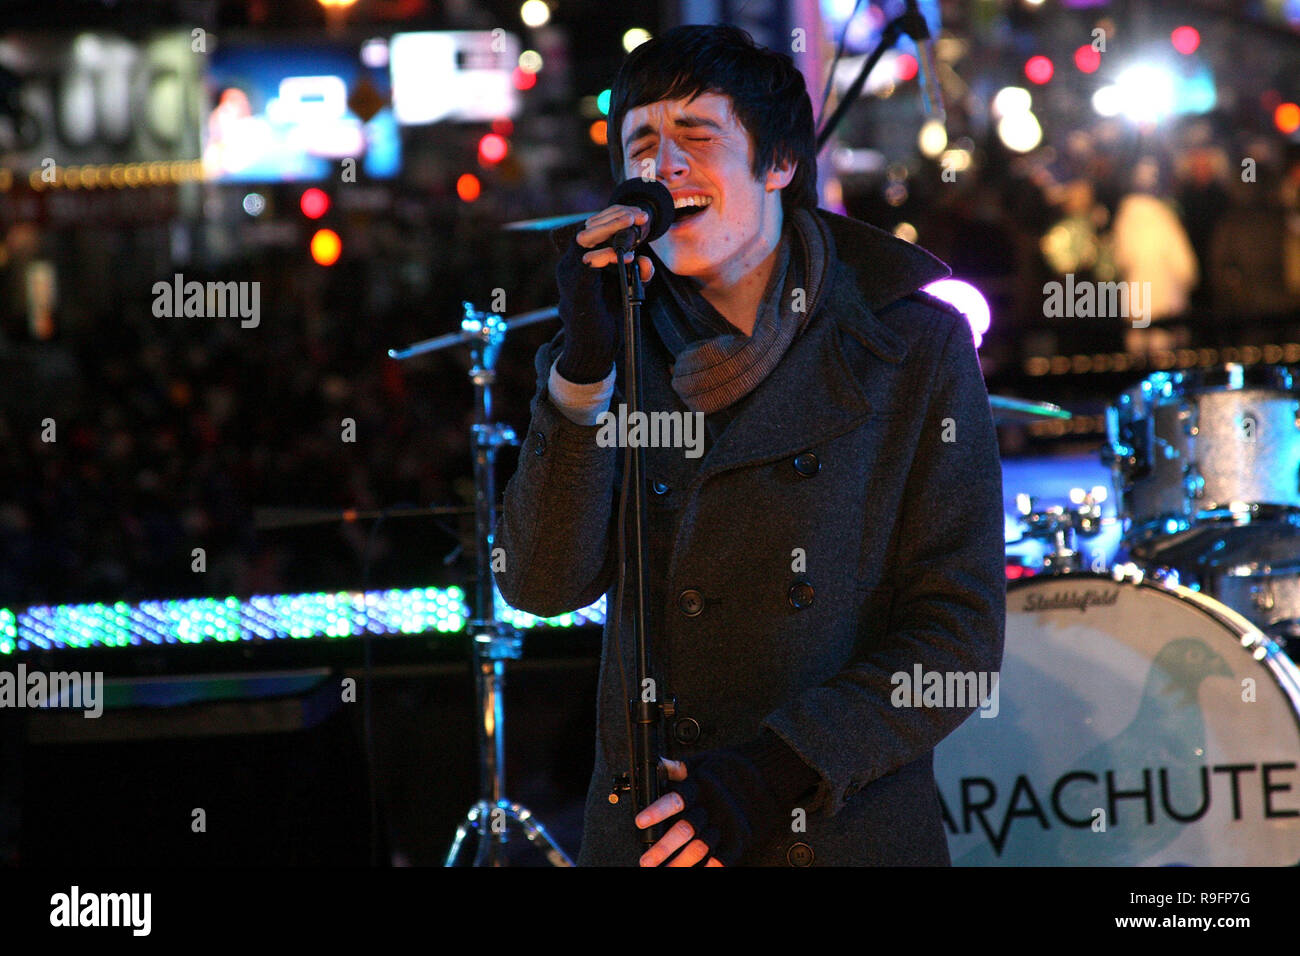 NEW YORK - DECEMBER 31:  Parachute performs on stage at the ceremony to lower the New Years Eve ball in Times Square on December 31, 2008 in New York City. (Photo by Steve Mack/S.D. Mack Pictures) Stock Photo